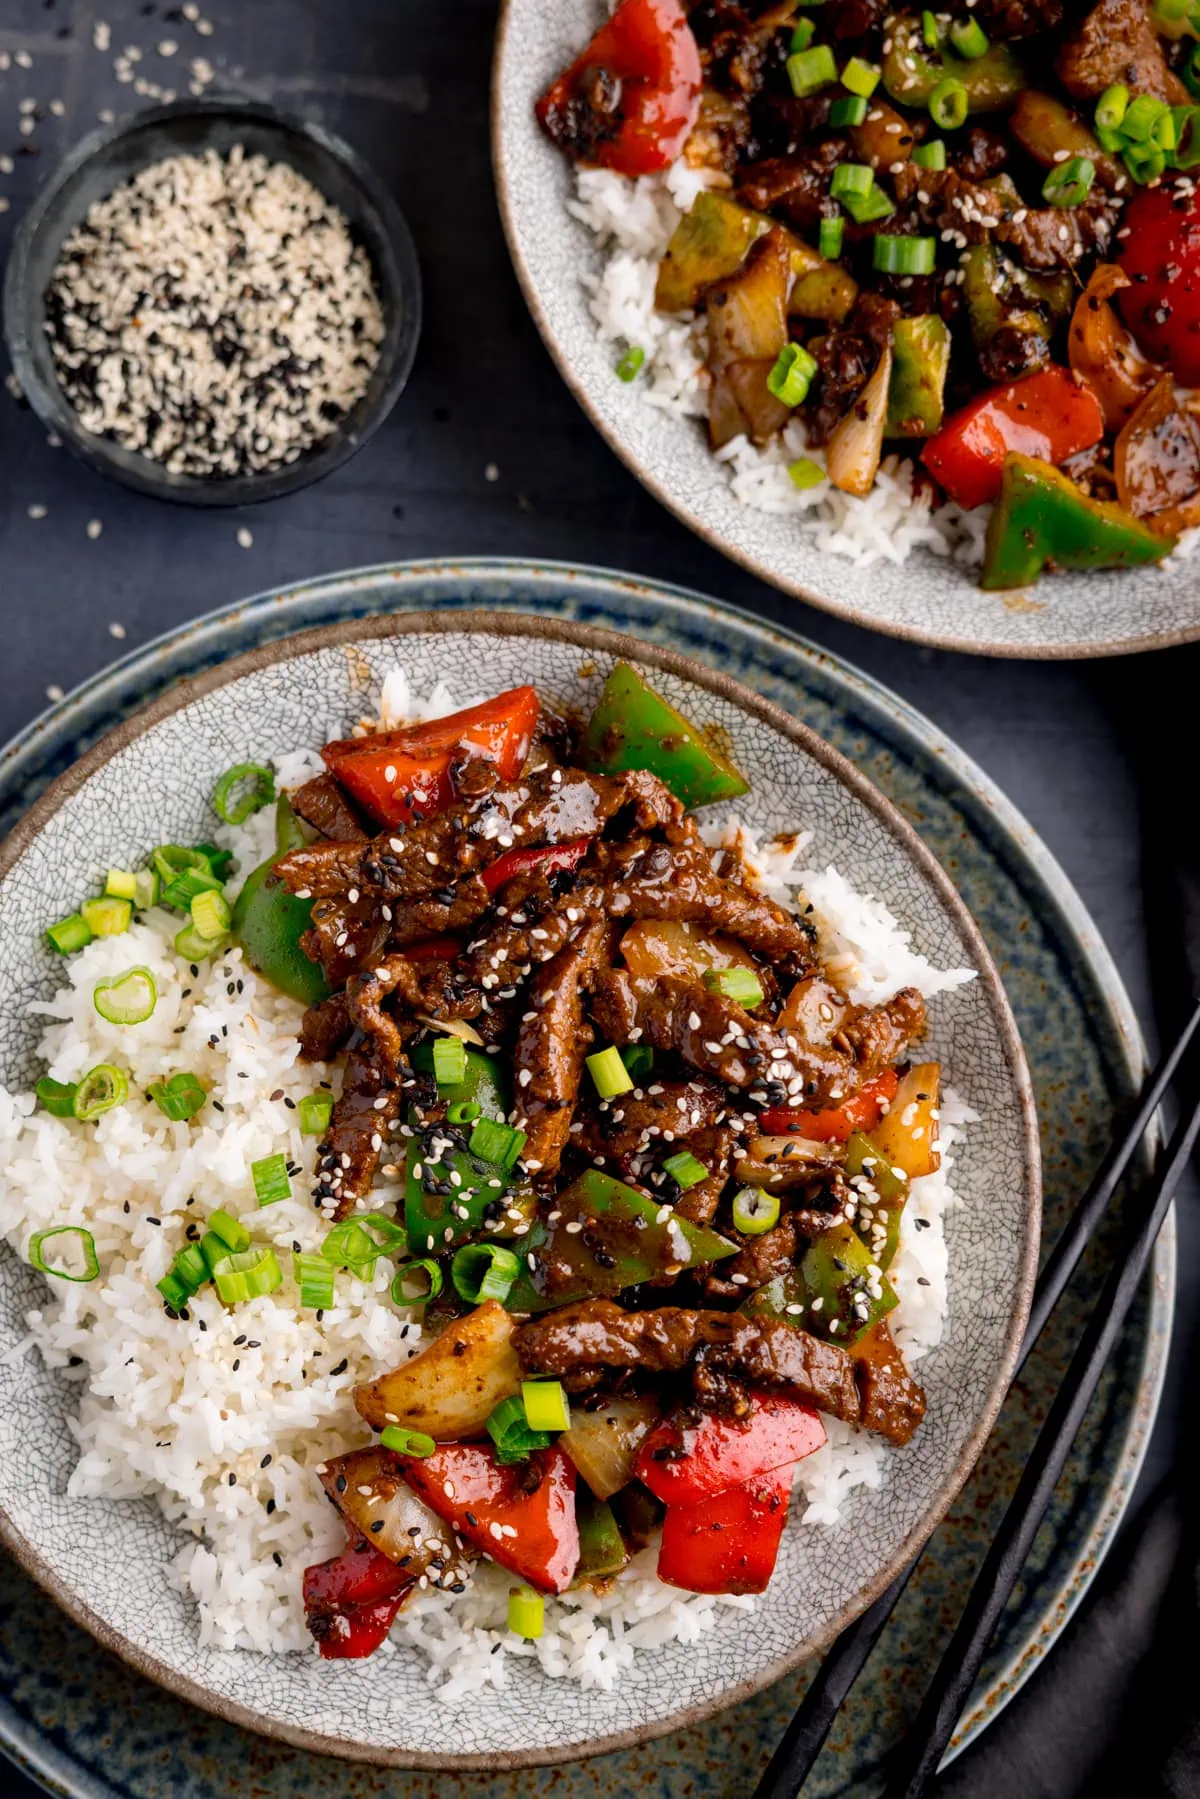 Beef in black bean sauce stir-fried with boiled rice in a bowl, topped with scallions and sesame seeds. The bowls are on a dark surface and there is another bowl on the plane. There is a small bowl of black and white sesame seeds nearby.